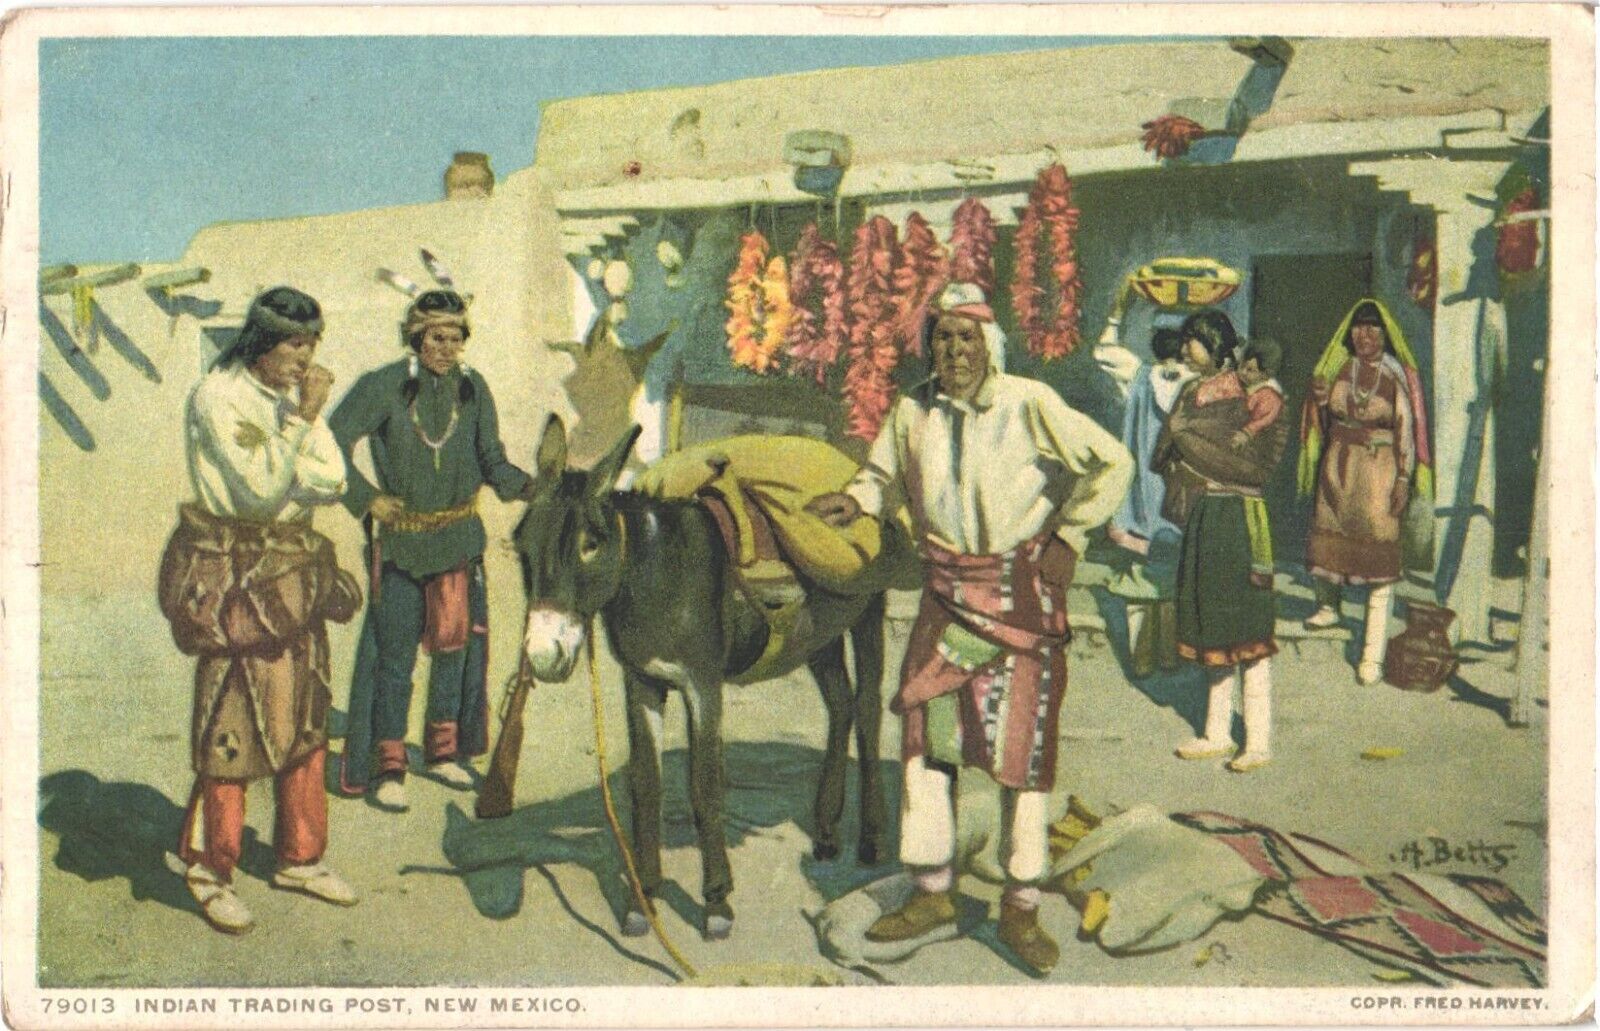 Indian Trading Post, New Mexico Painting by Harold Betts Postcard